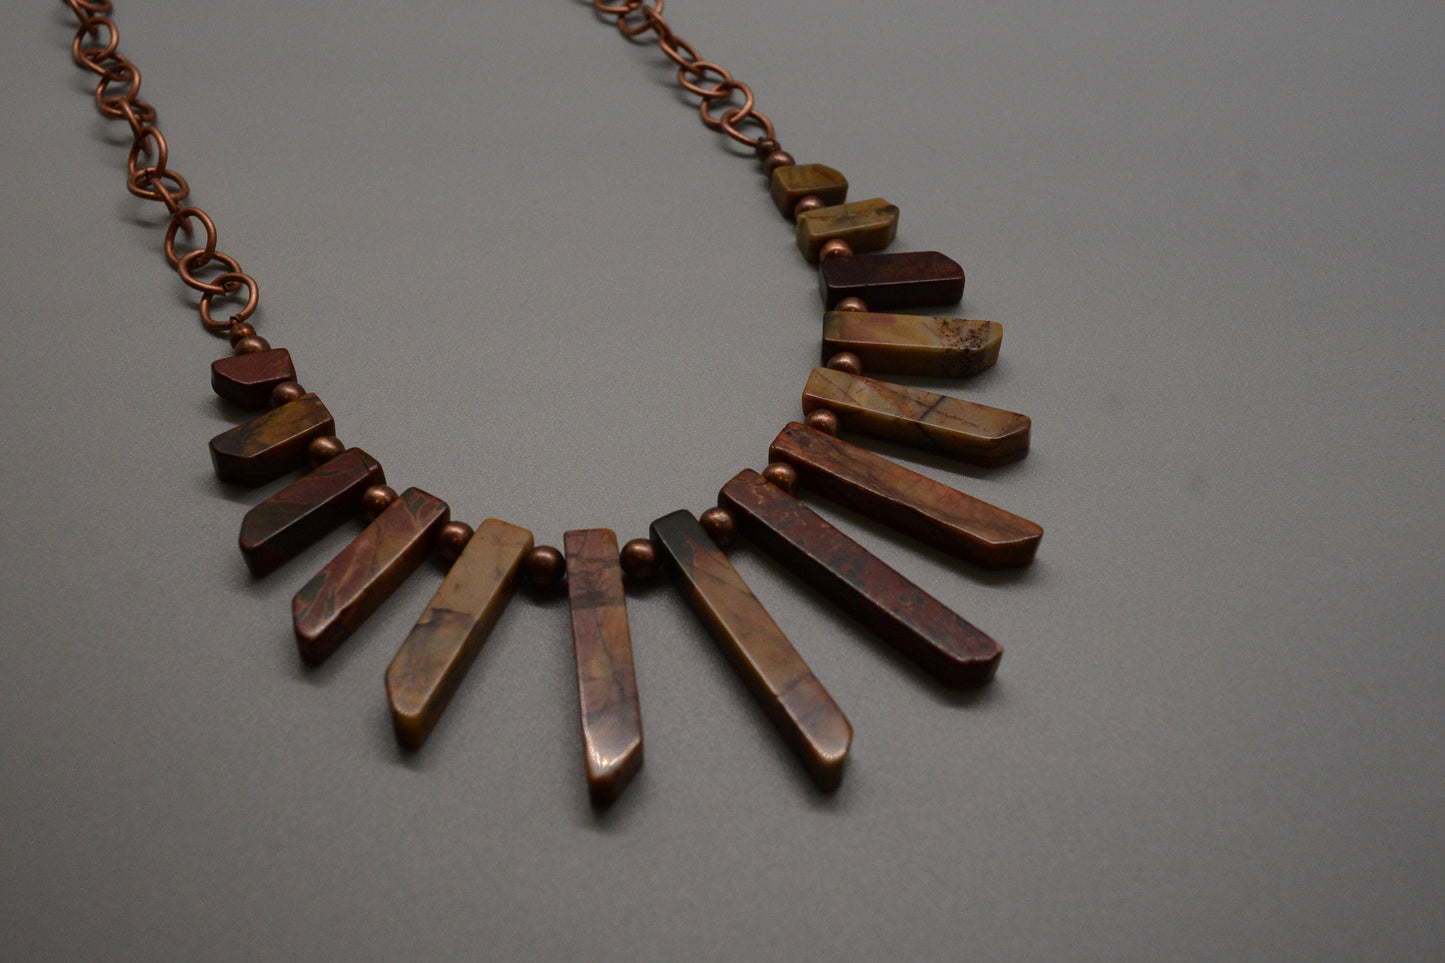 Copper and Jasper Collar Necklace, RBG Necklace, Made in Maine